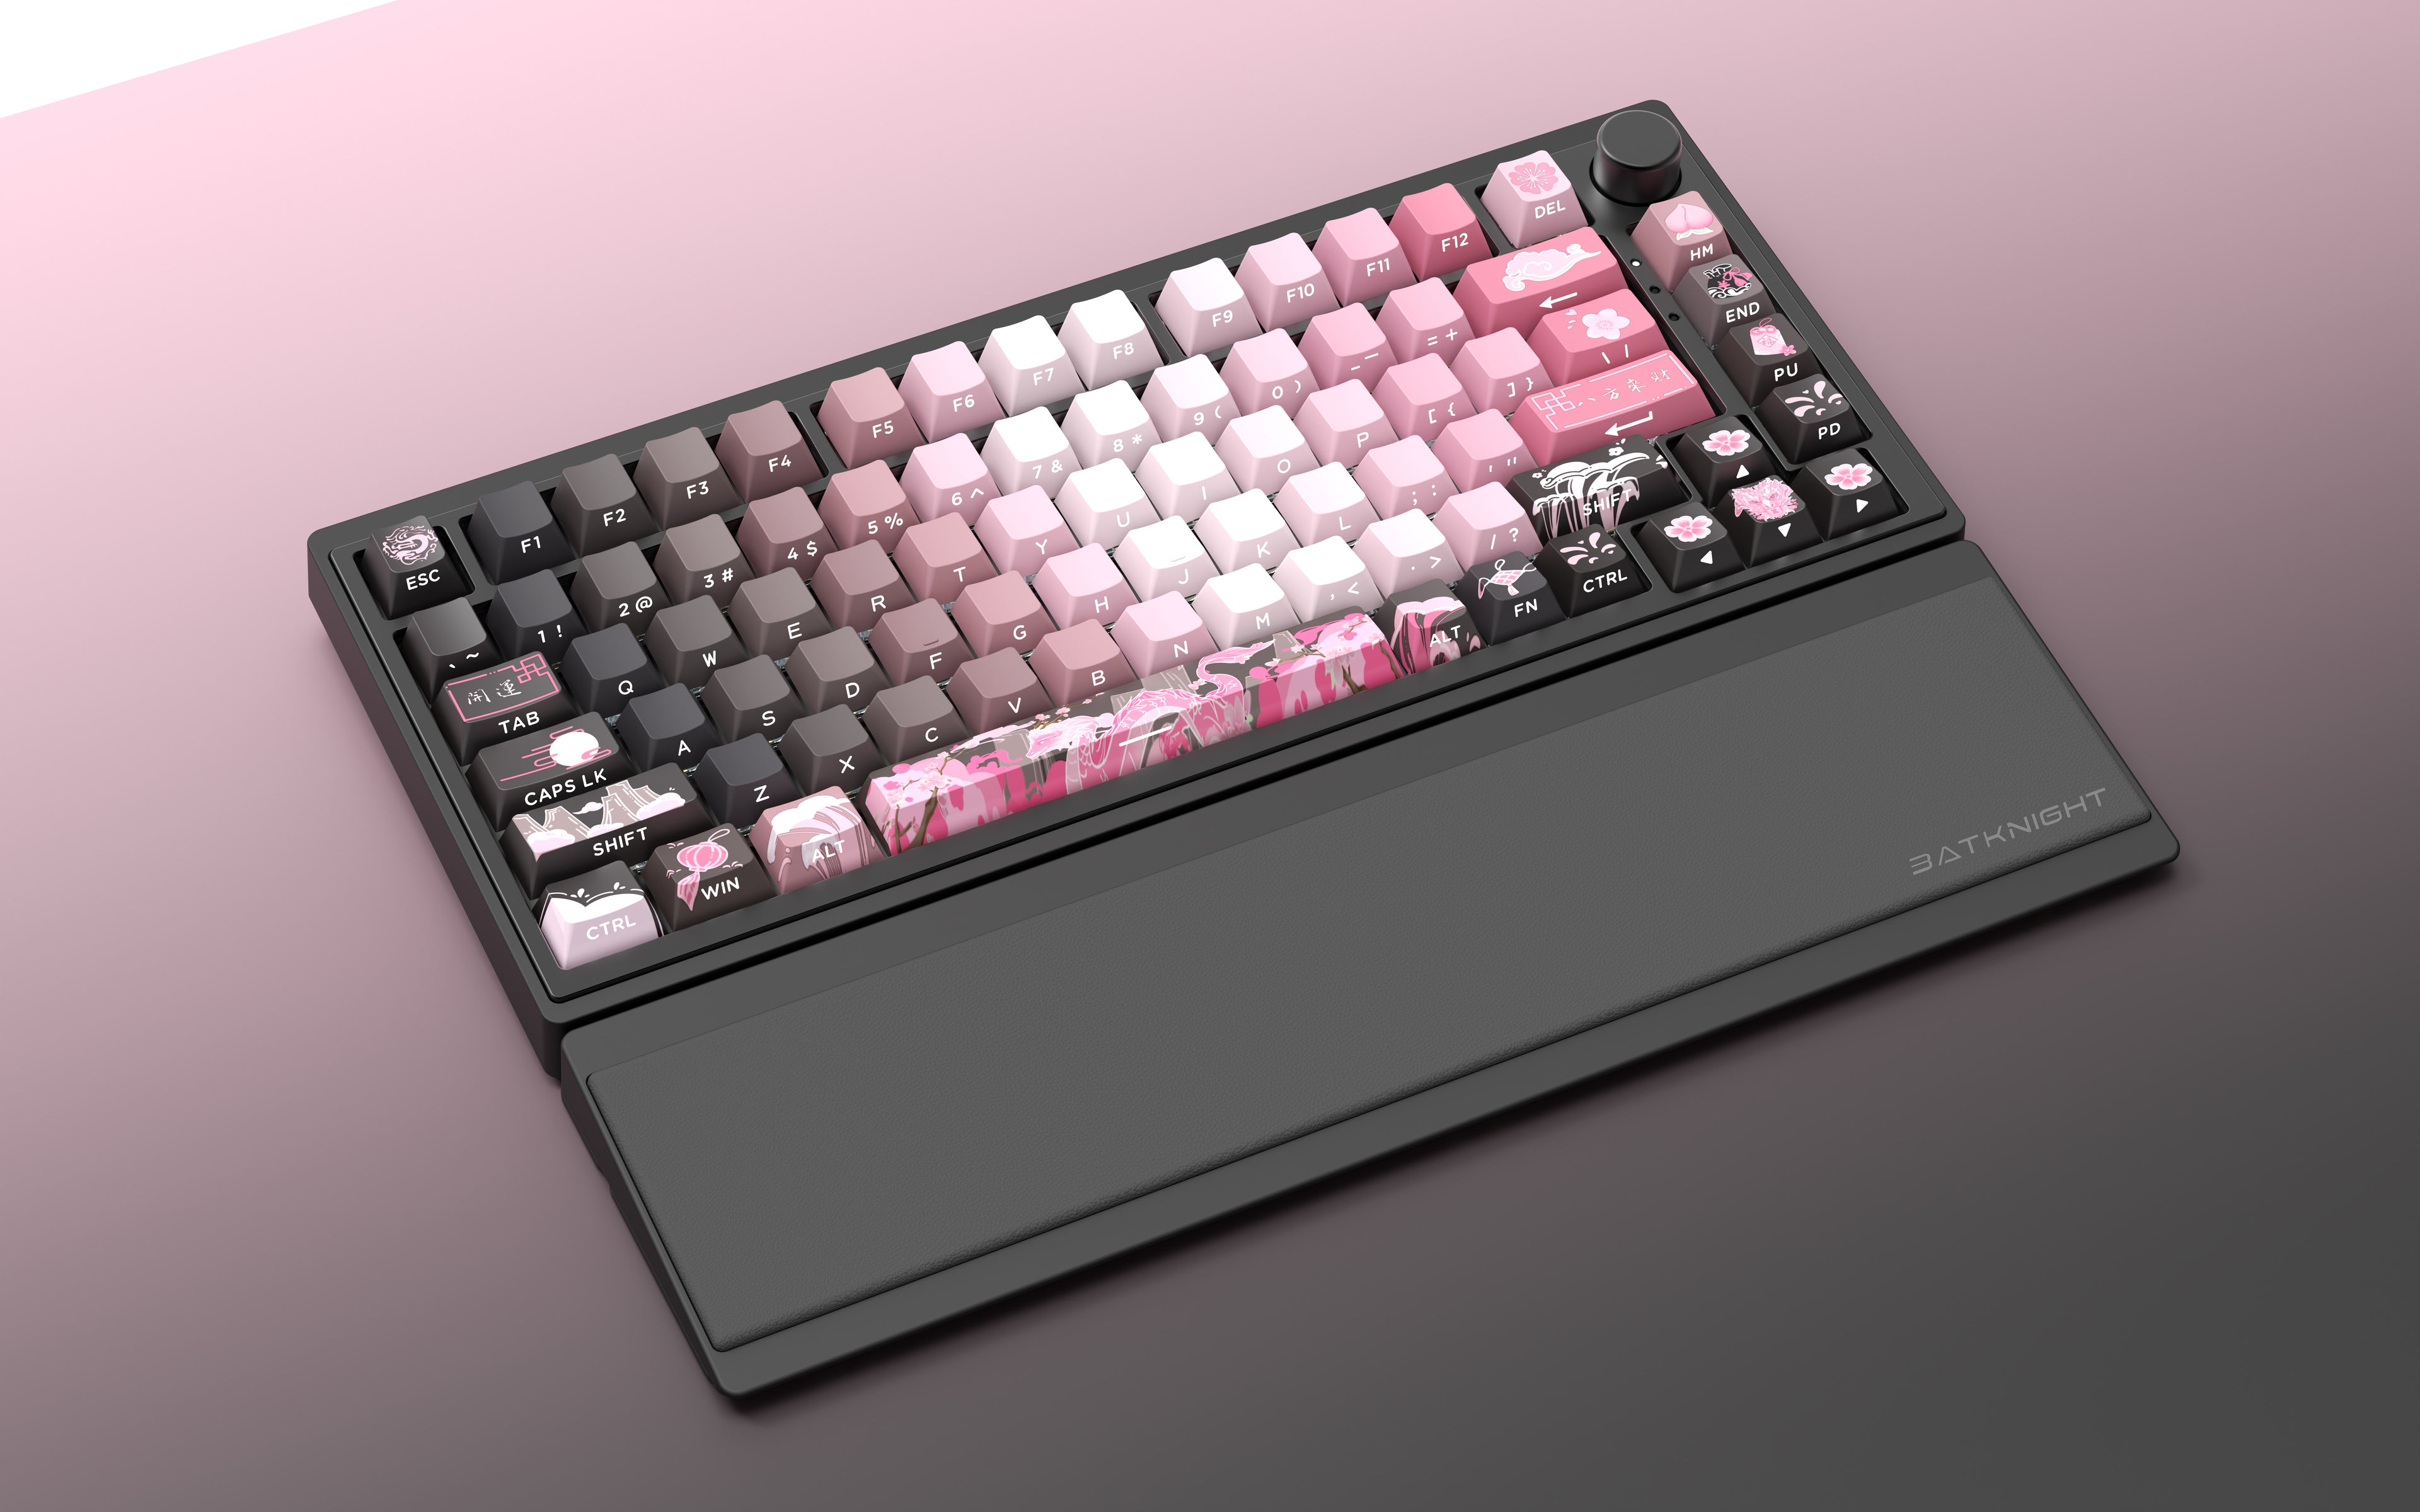 [In Stock] TaoYaoLong Chinese Style Cherry PBT Shine Through Keycaps Set (Free Shipping To Some Countries)